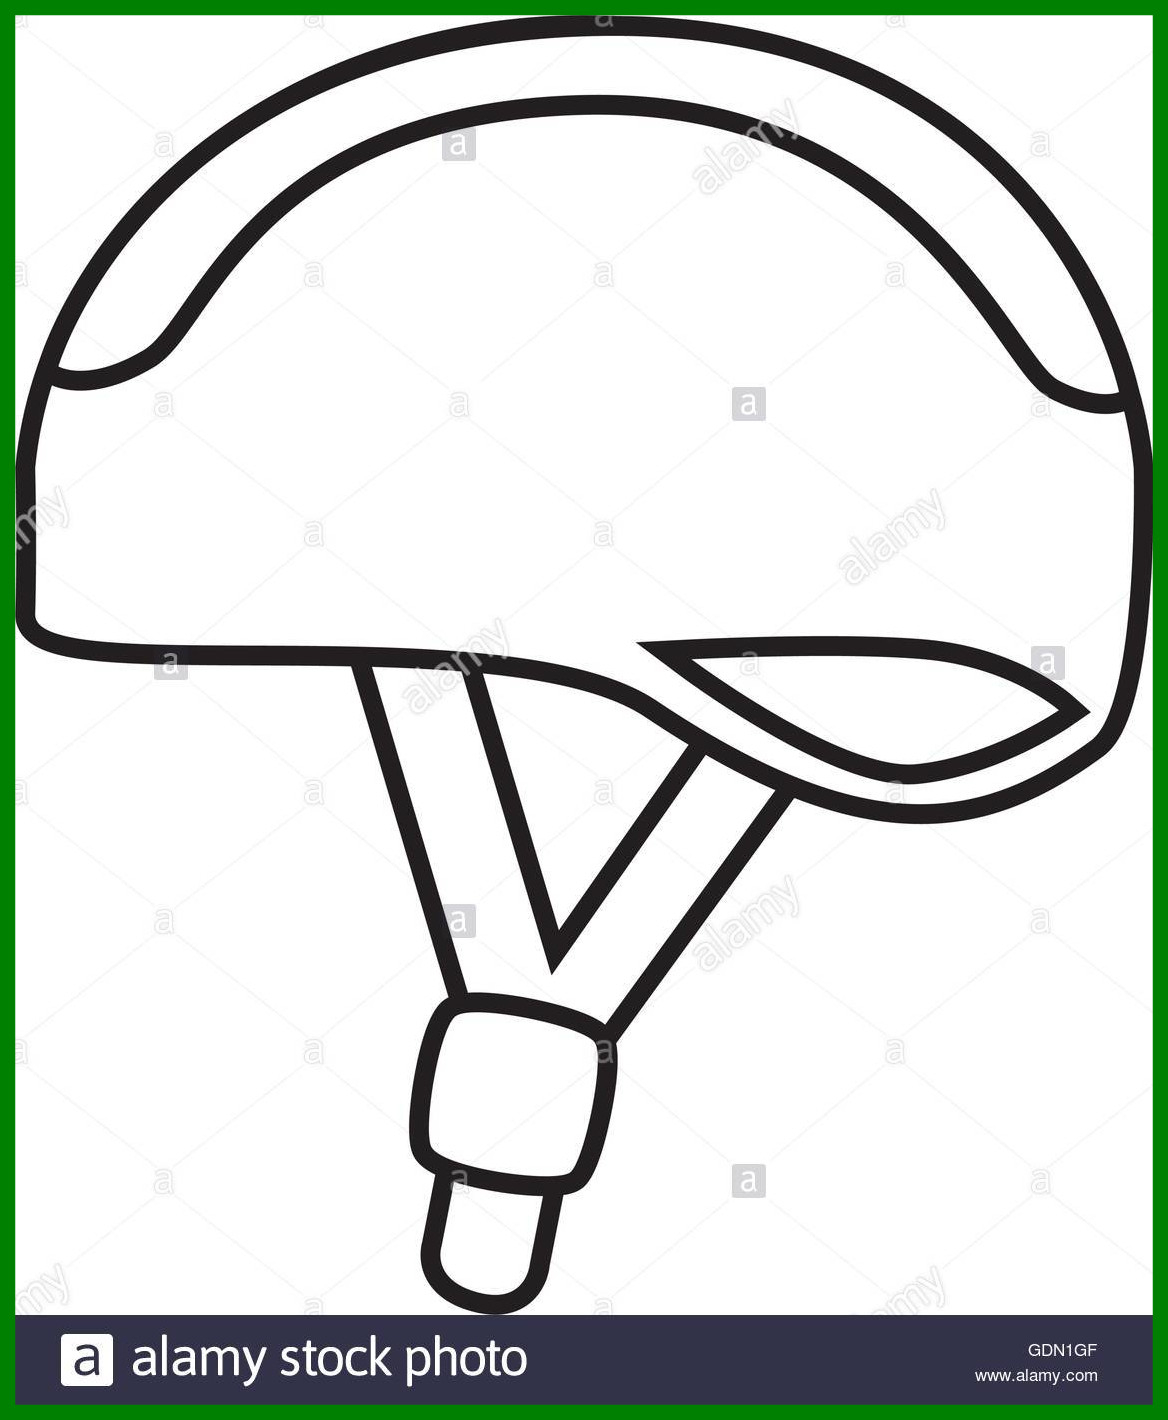 Bike Helmet Coloring Page Collection Of Bike Helmet Drawing Download More Than 30 Images Of